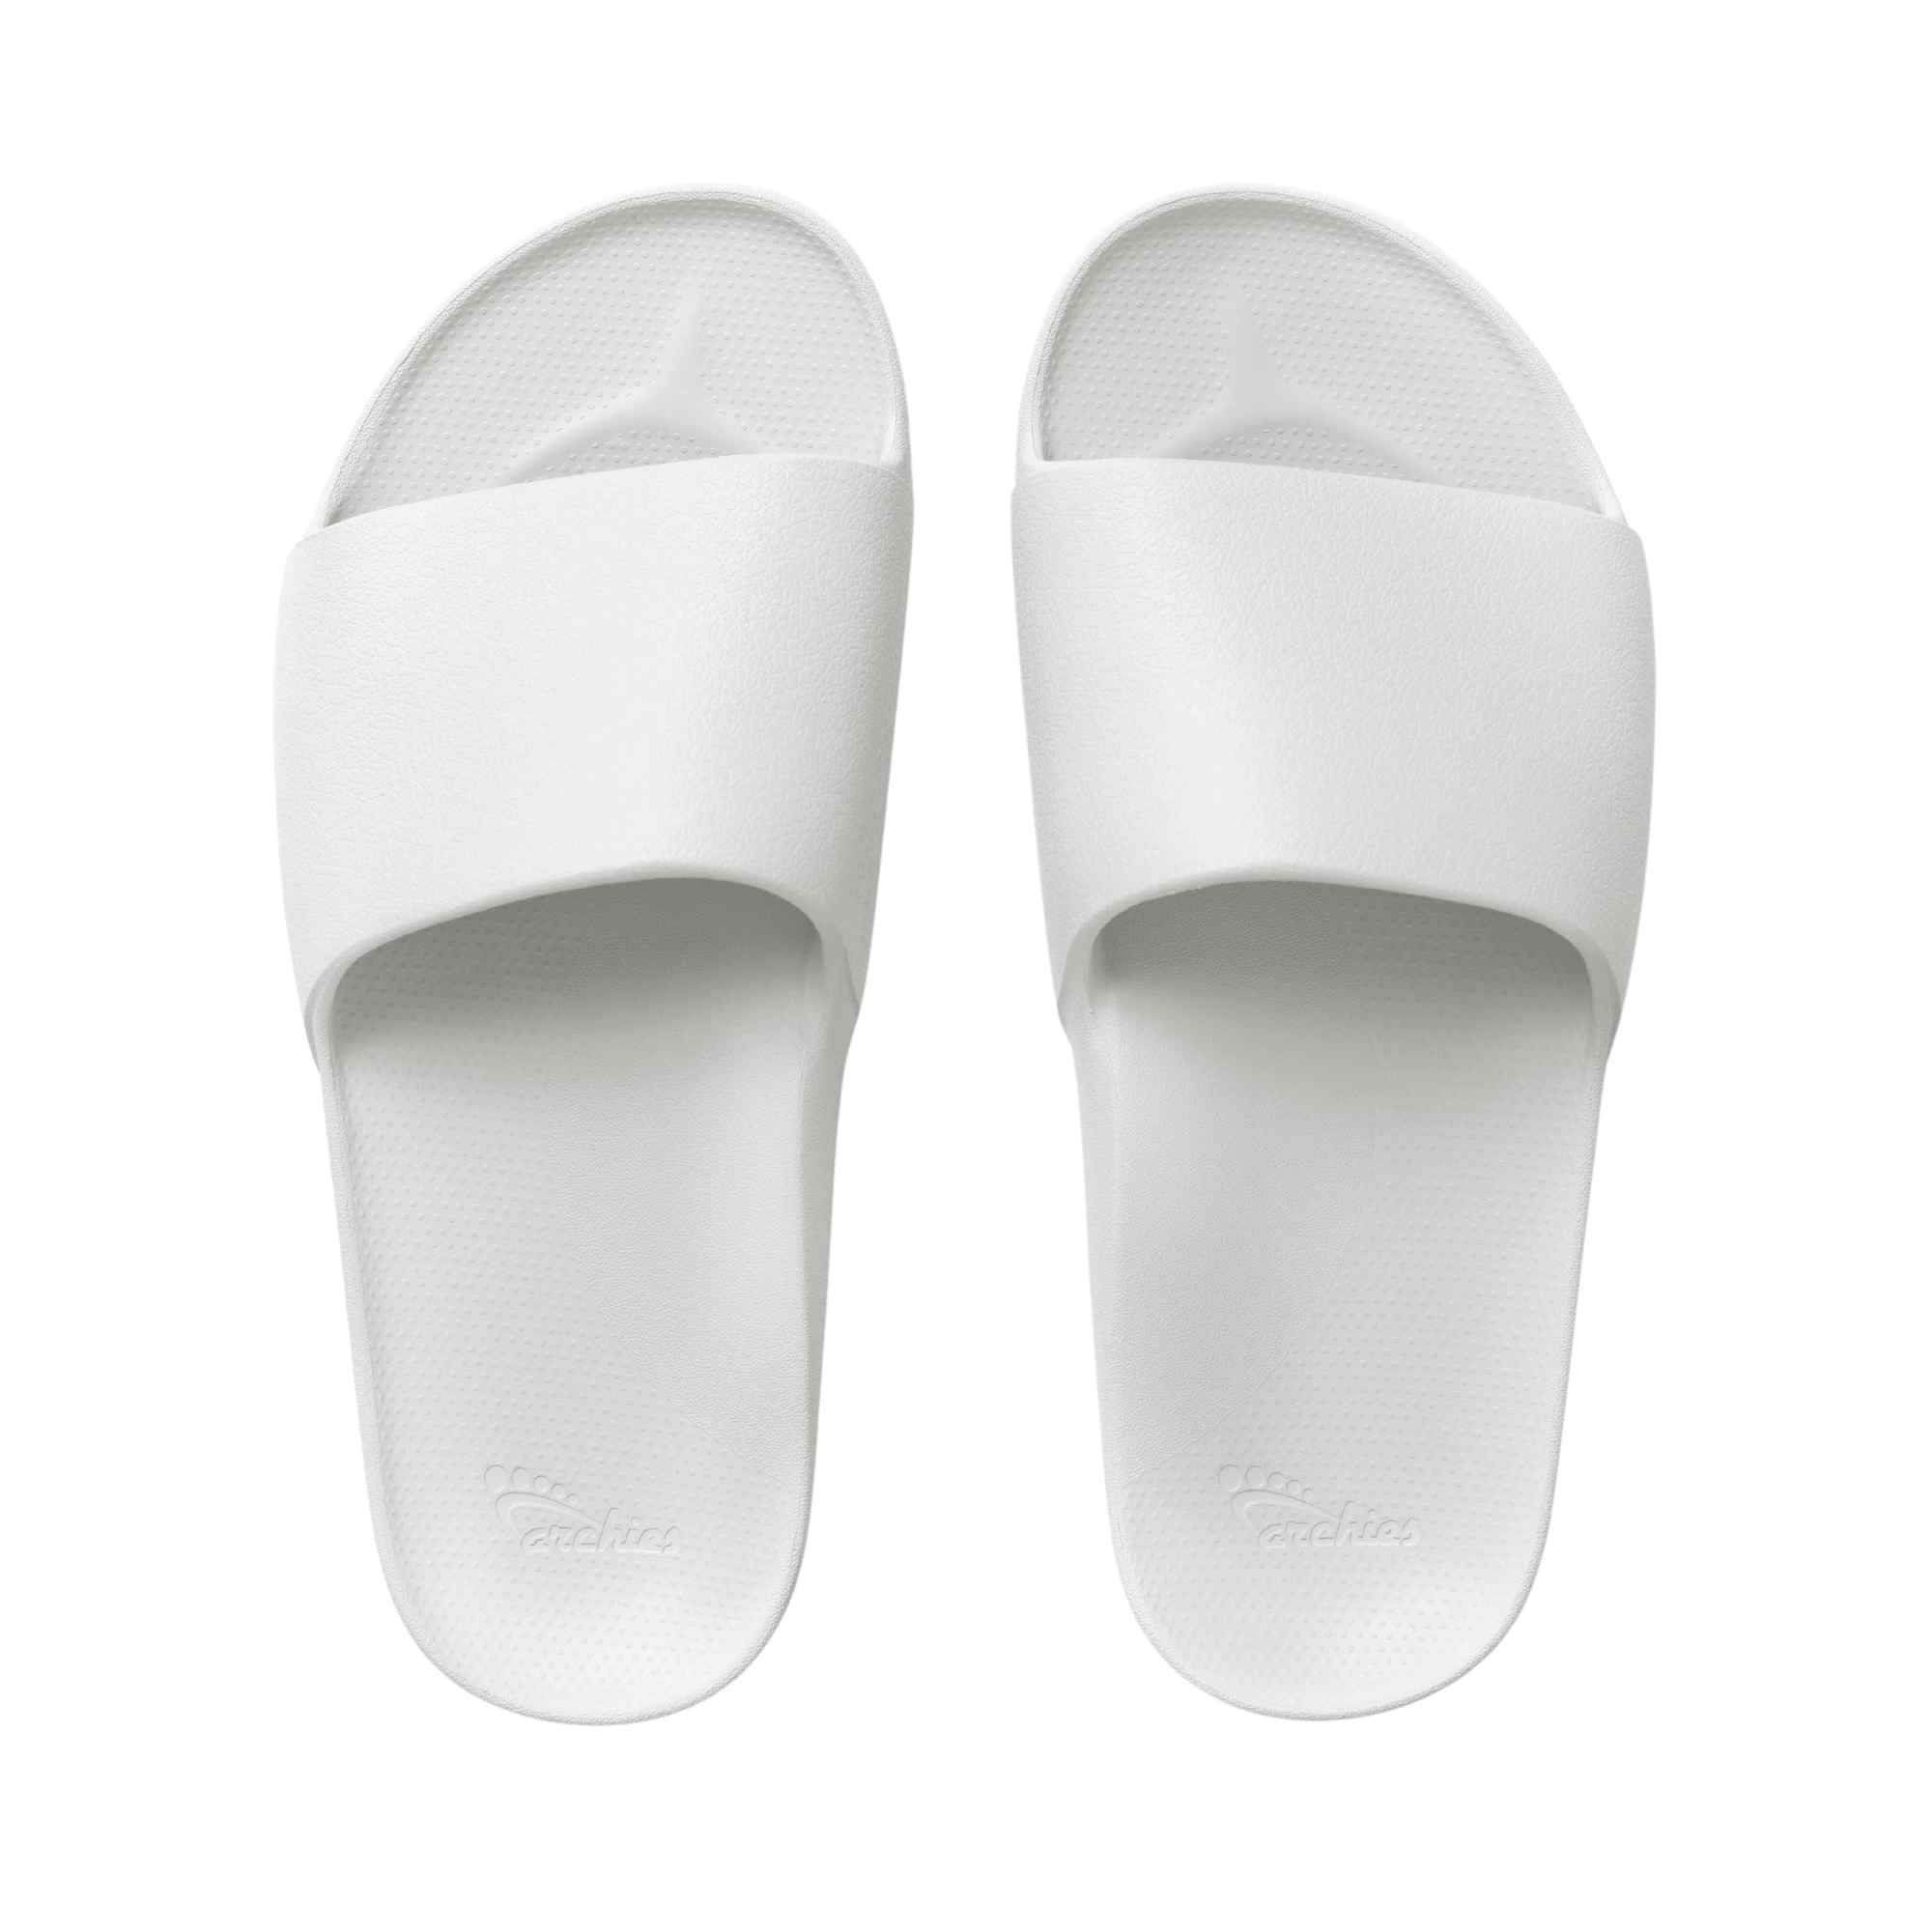 Archies arch support slides - The Running Well Store